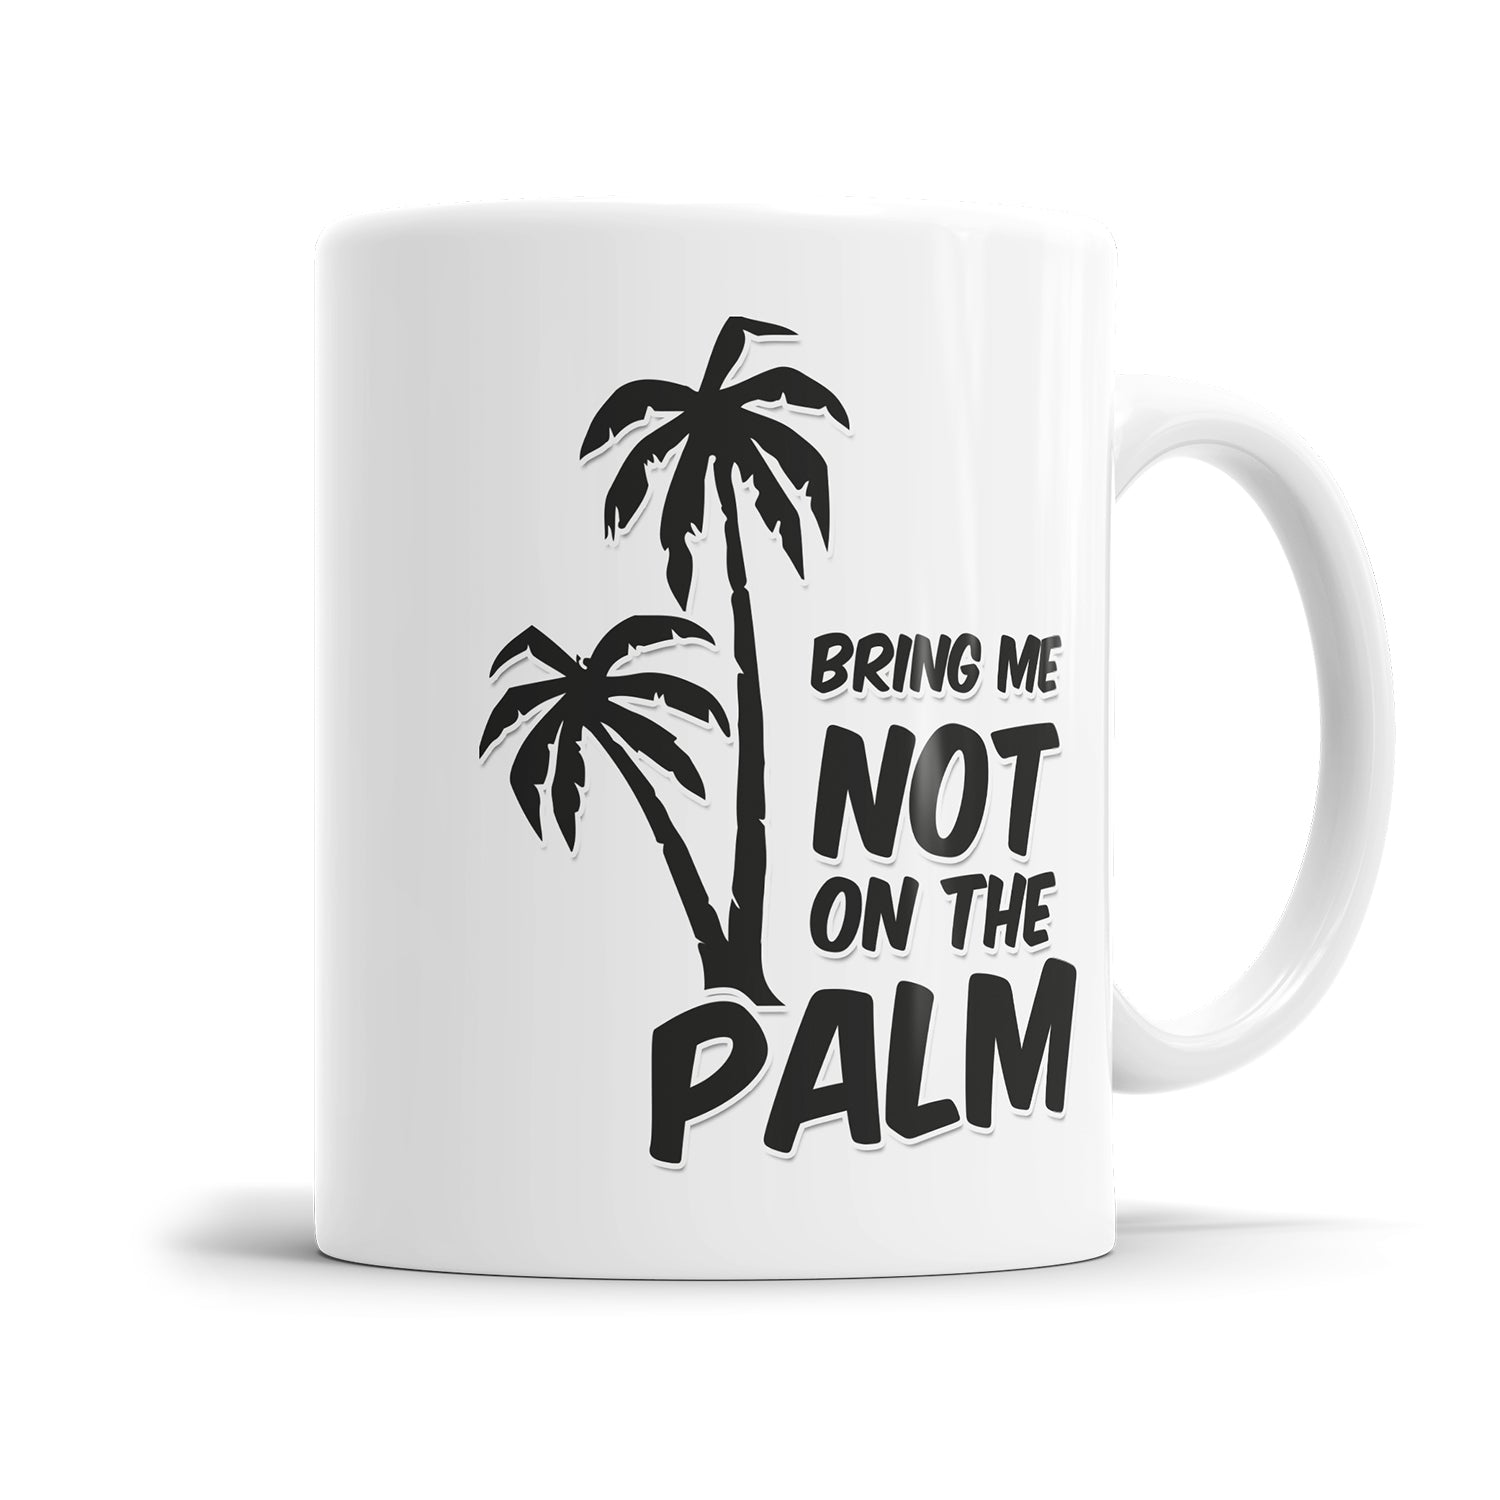 Bring me not on the Palm Tasse mit Spruch Denglish Fulima